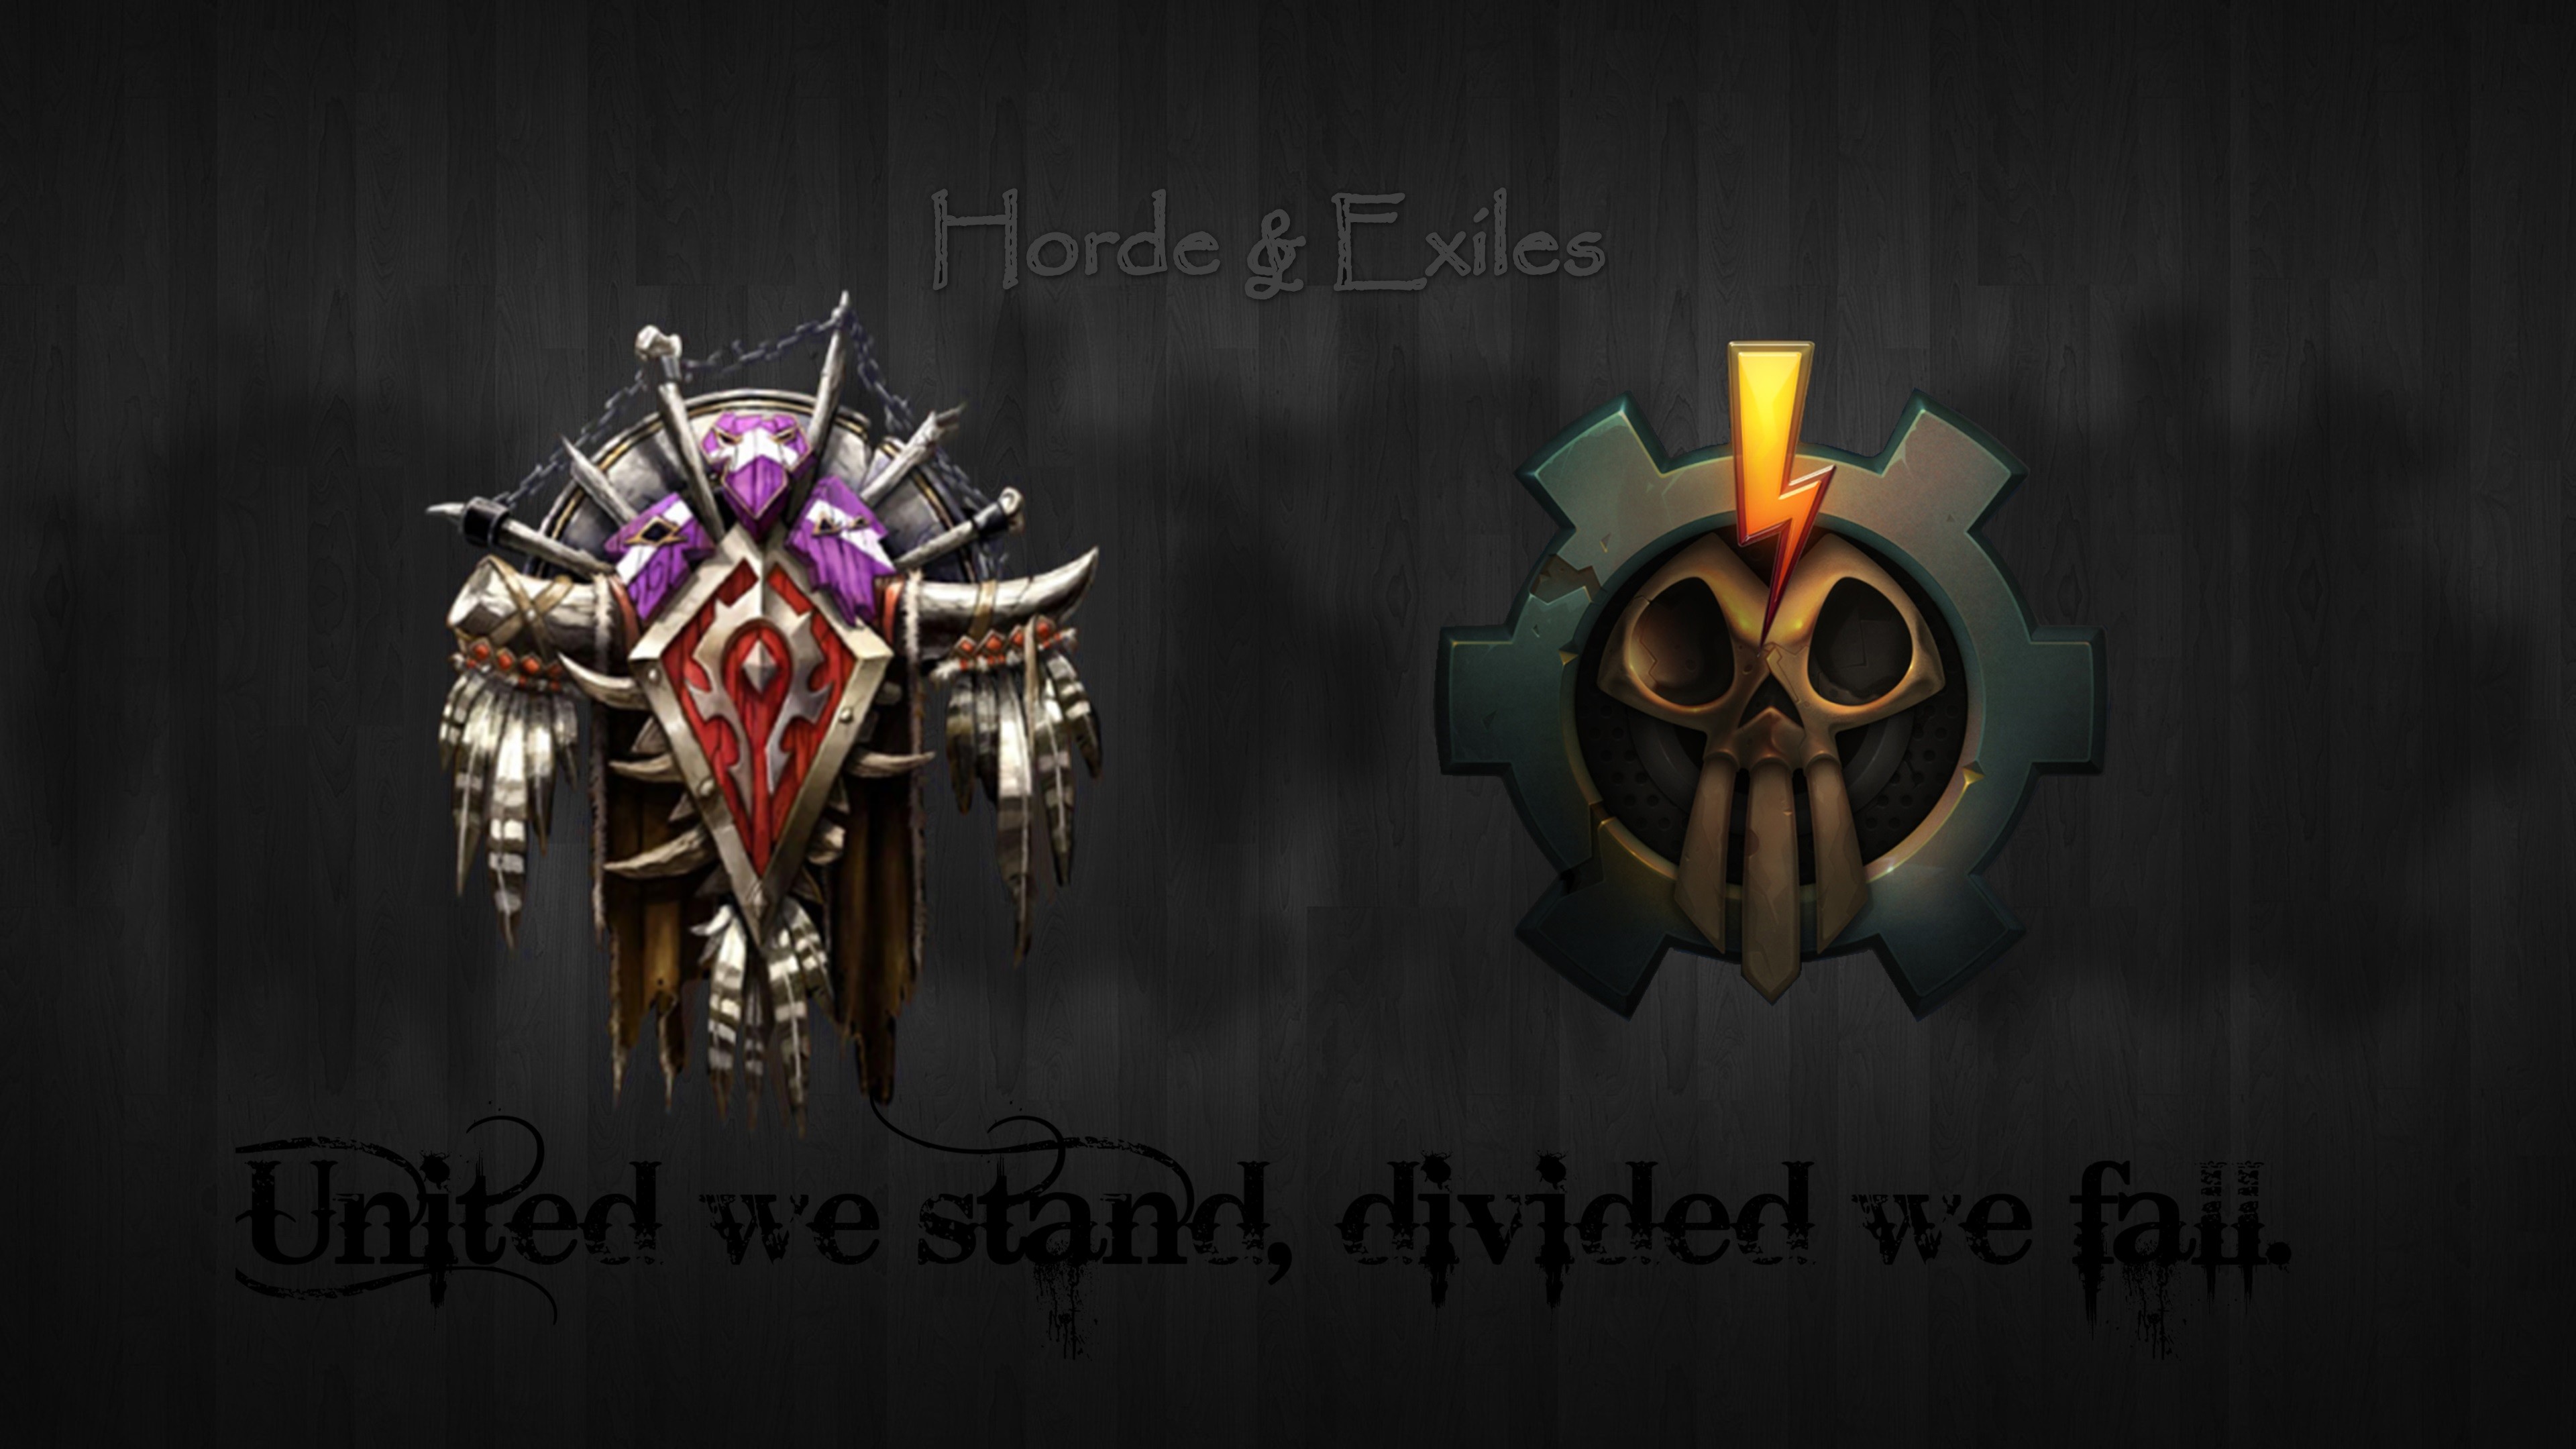 3840x2160 ... Horde and Exiles United We Stand 4K Wallpaper by FranBunnyFFXII